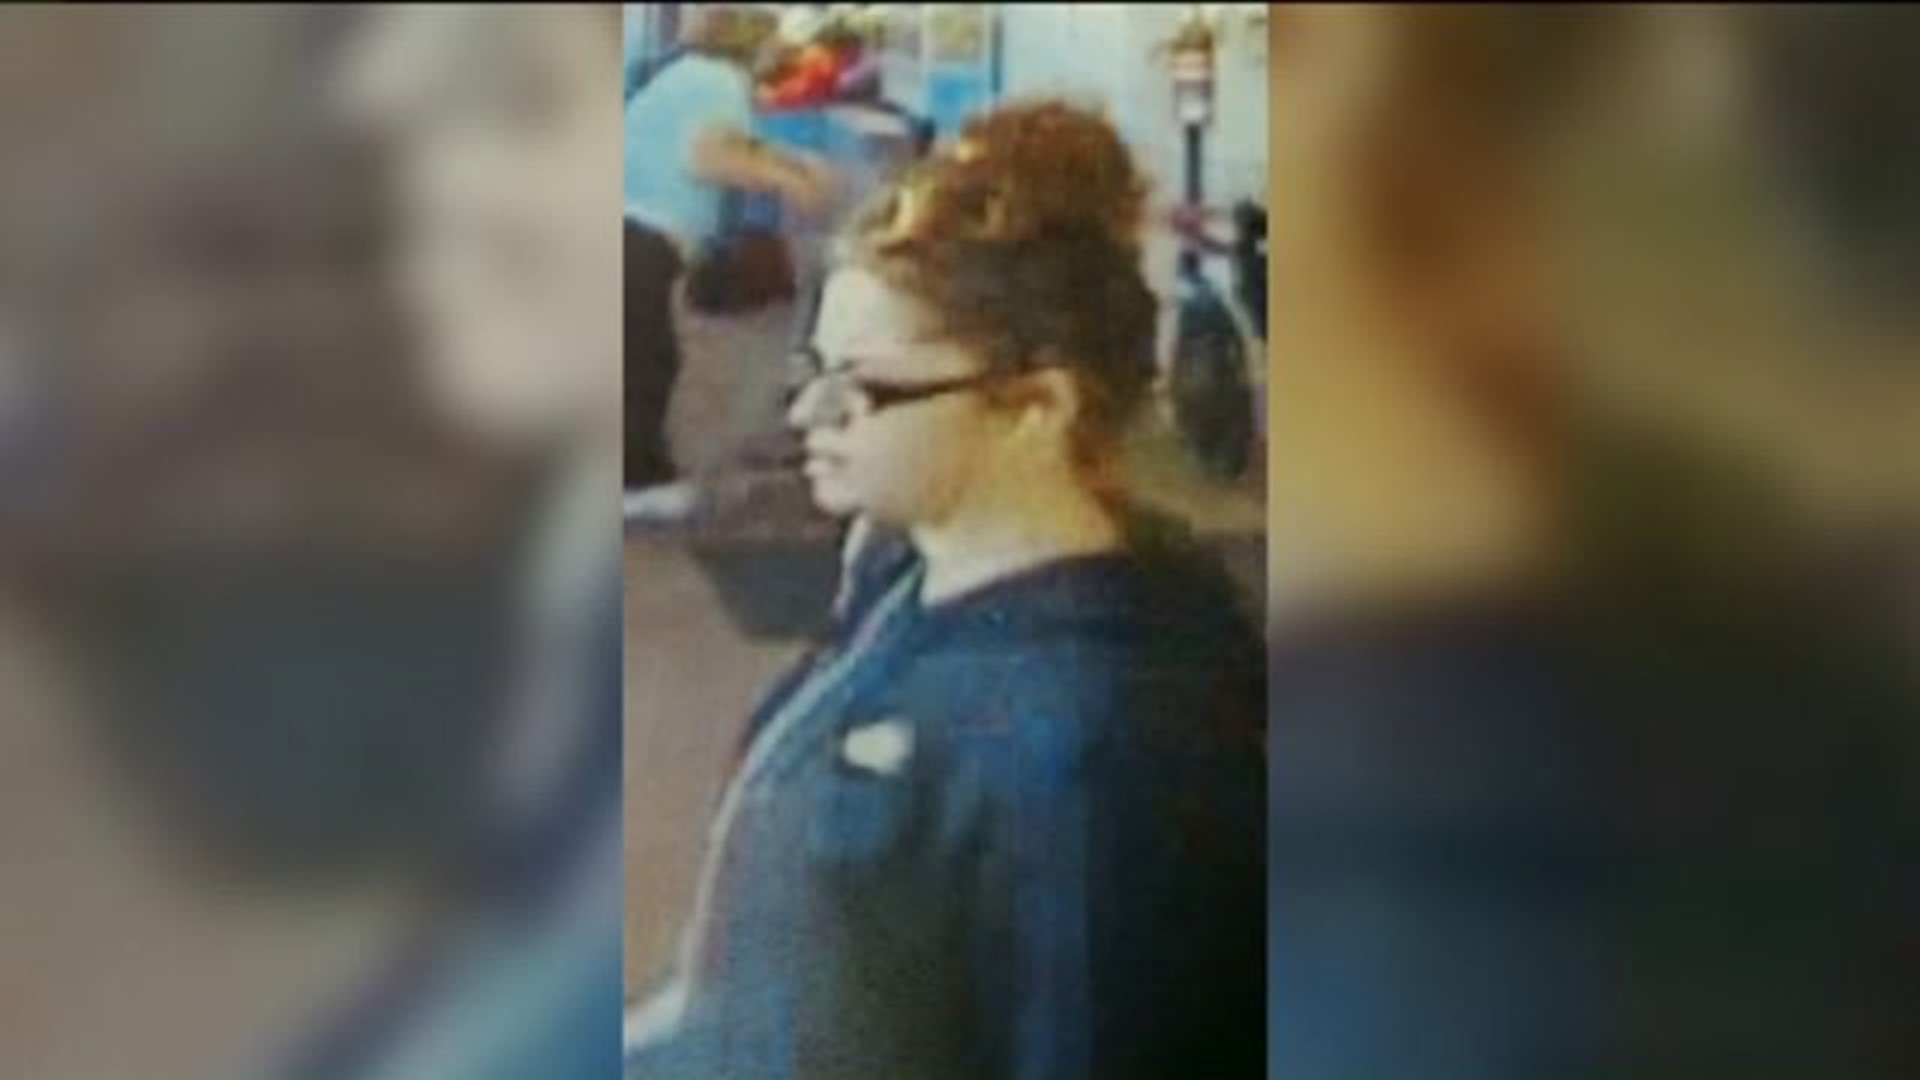 Police Searching For Woman Suspected of Using Fake $100 Bills at Walmart